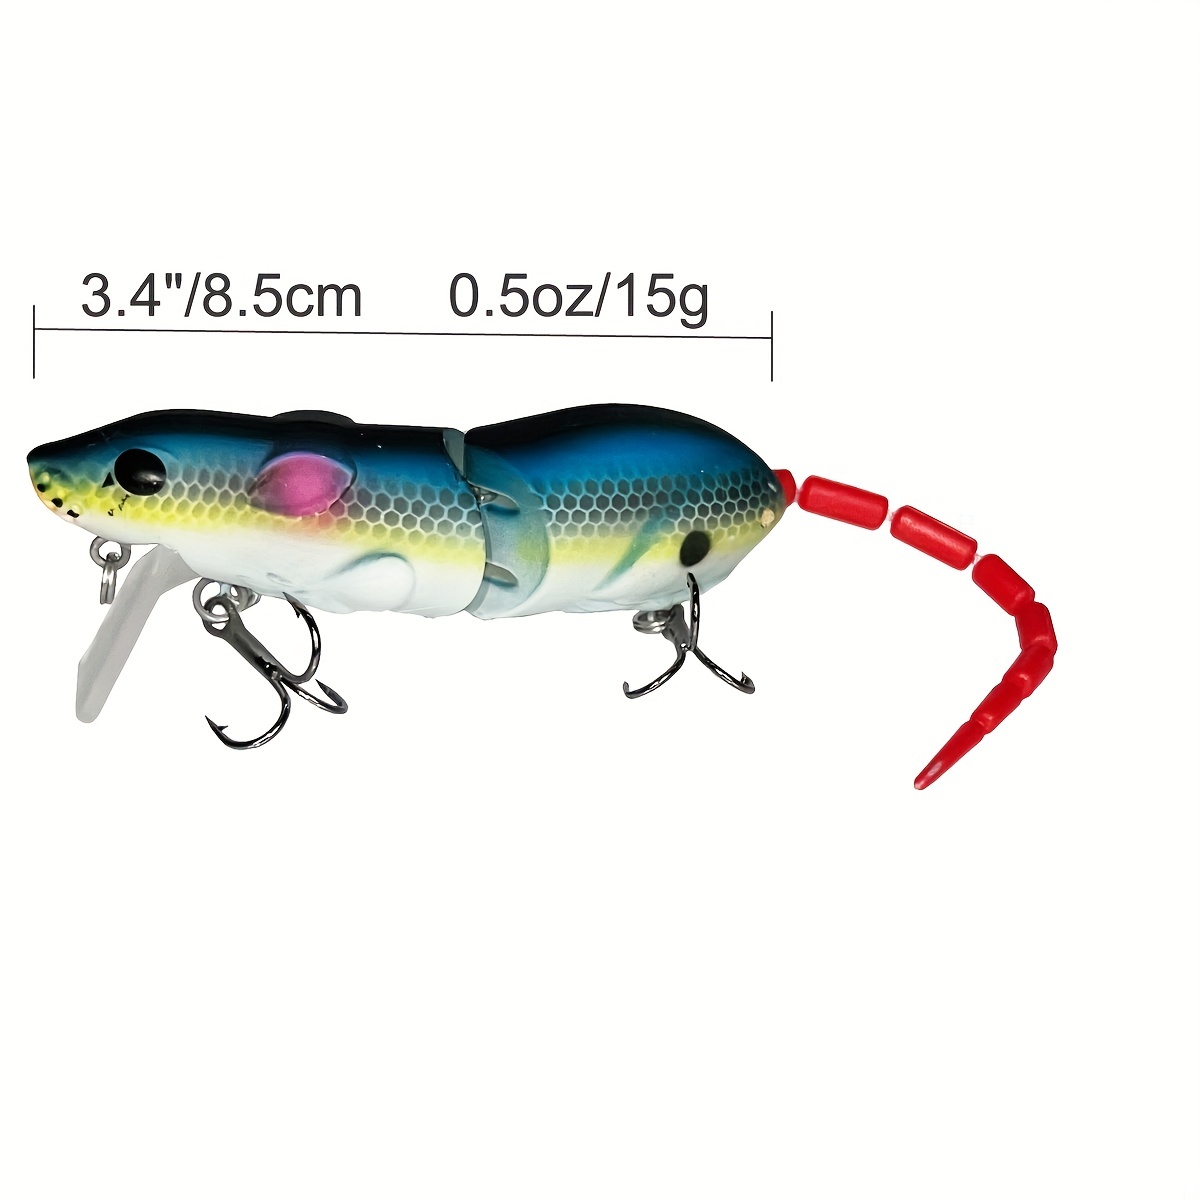 Artificial Fishing Lure Plastic Mouse Lure Swimbait Rat Fishing Bait for  pike bass With Hook Fishing Tackle minnow crankbaits